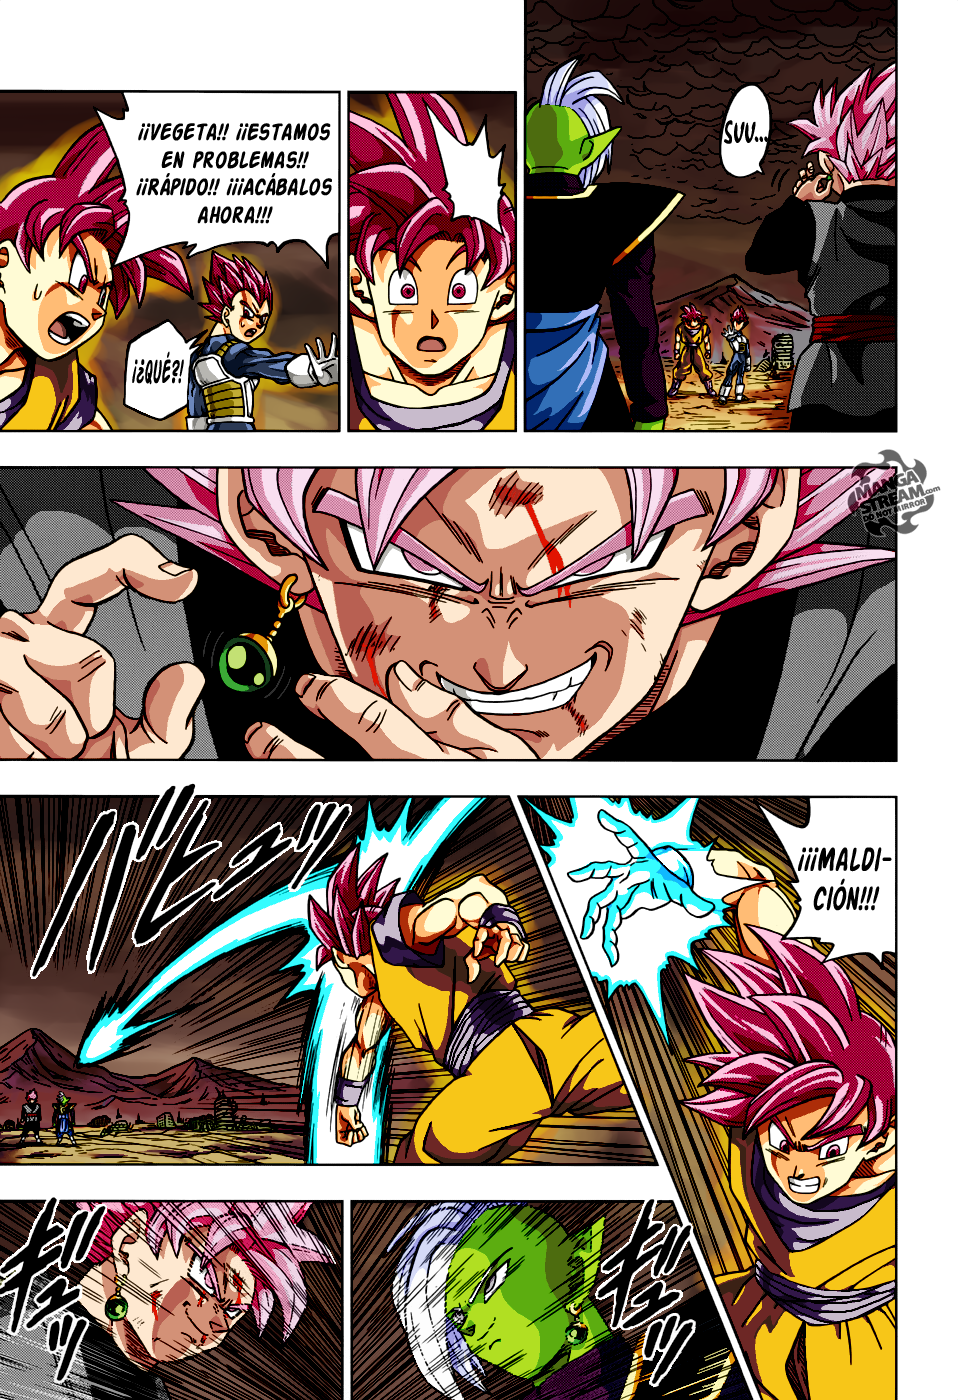 Dragon ball super manga 22 color (another page) by bolman2003JUMP on DeviantArt